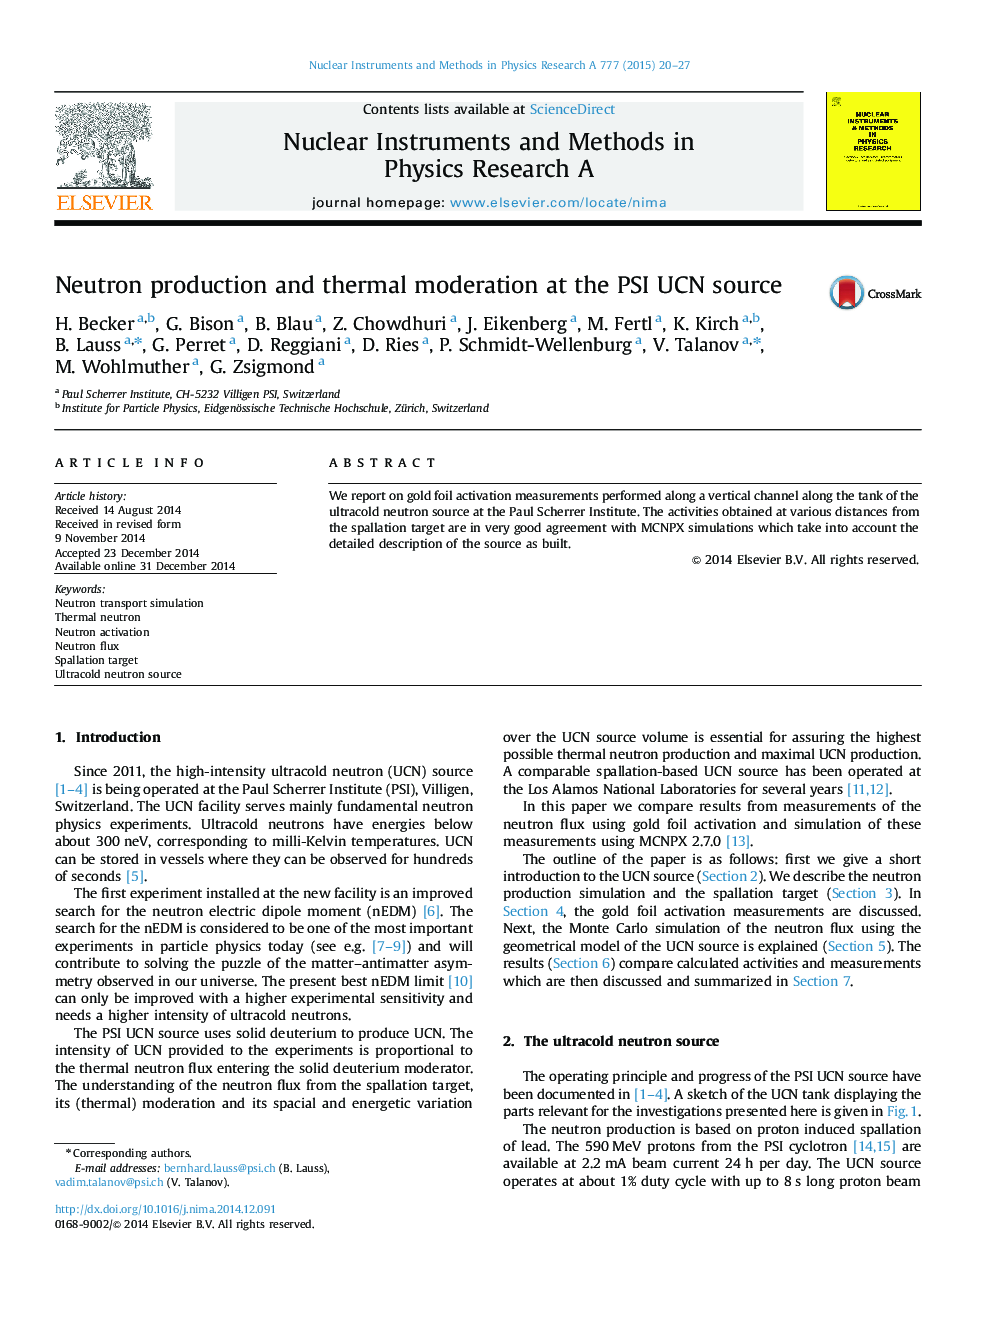 Neutron production and thermal moderation at the PSI UCN source